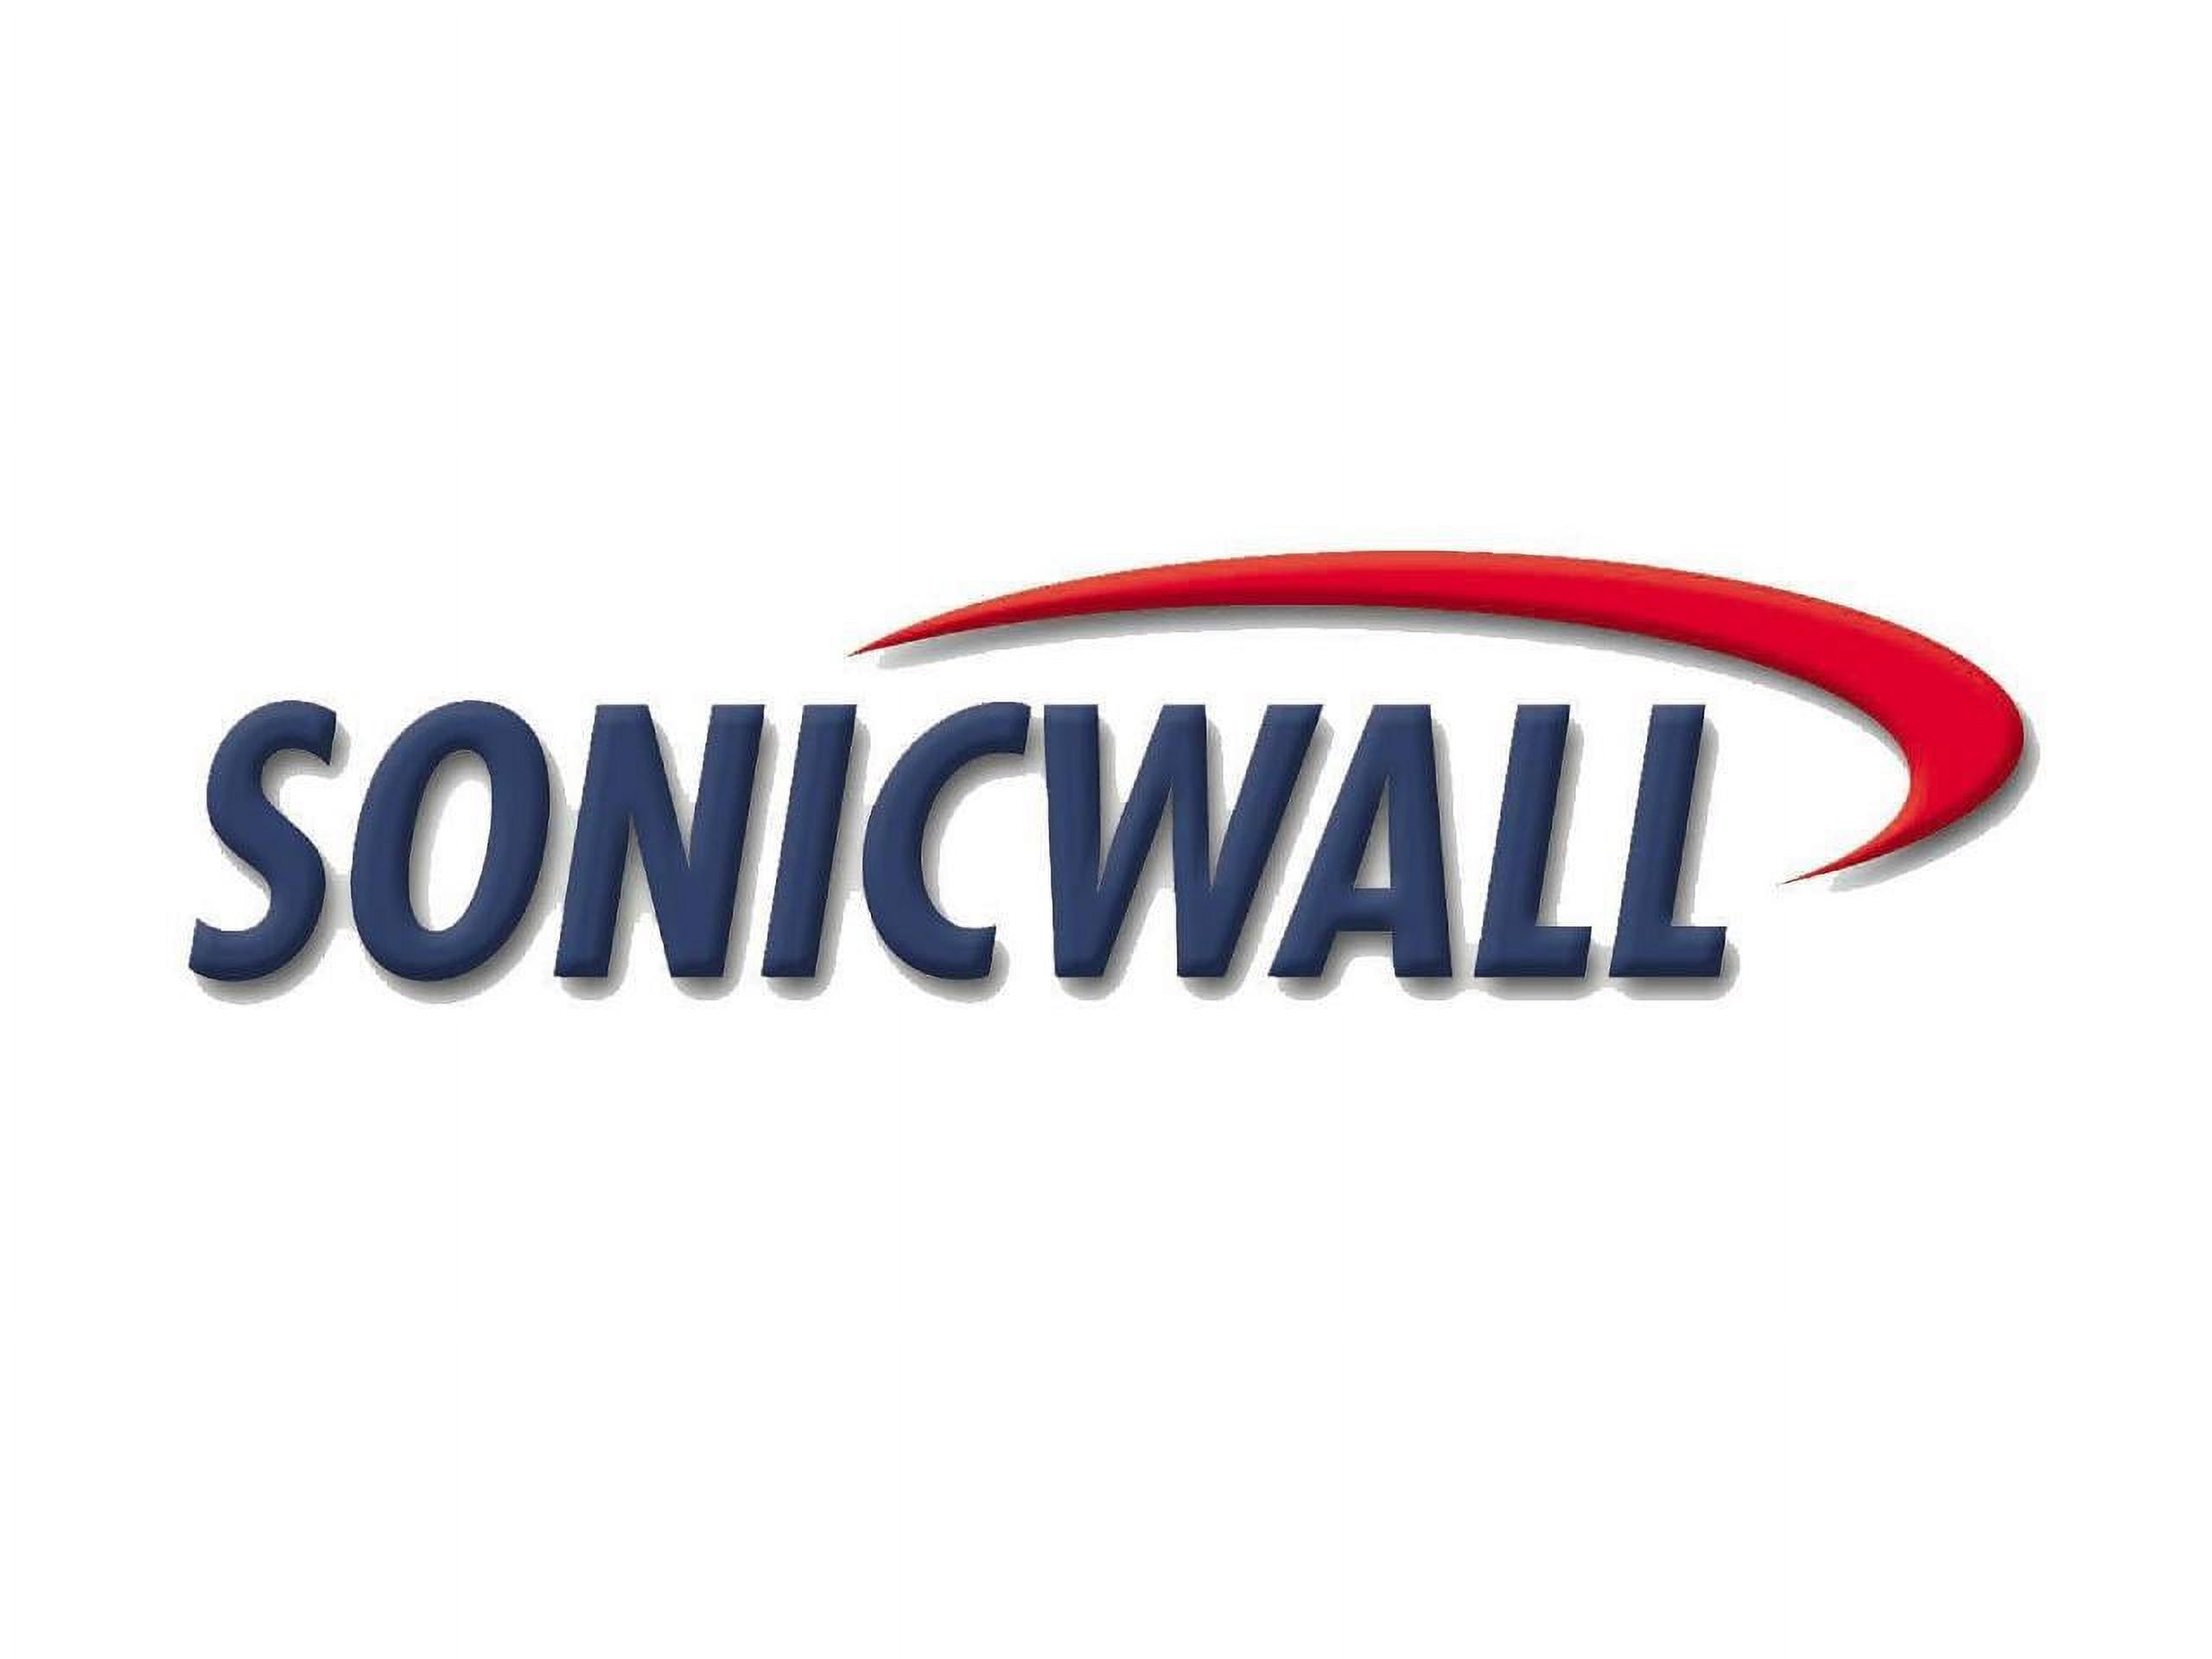 SonicWall NSA 4650/5650/6650/9250/9450/9650 FRU Power Supply 01-SSC-0019 - image 5 of 11